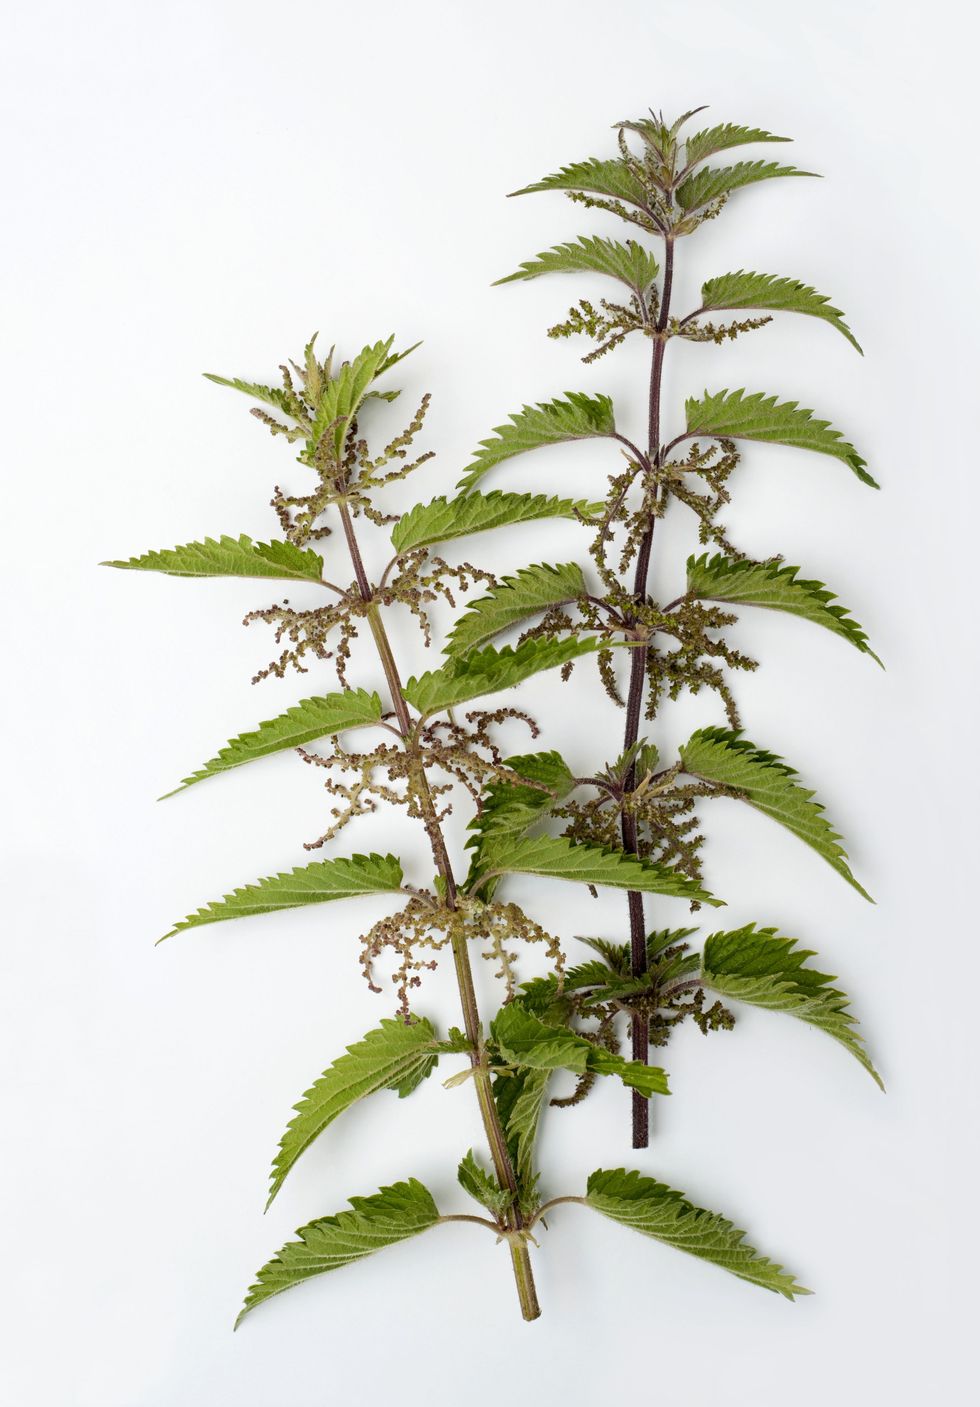 <p>Never heard of drinking nettles before? Neither had we, but here Bajaj breaks down why the plant could be a helpful and healthy substitute for caffeine binges: "Everyone knows about green tea and black tea, but one thing that is an interesting substitute is nettles. Nettles are like herbs. They have so many <a href="http://www.webmd.com/vitamins-supplements/ingredientmono-664-stinging%20nettle.aspx?activeingredientid=664" target="_blank">medicinal properties</a> and have so many good uses. Specifically, it can be great for people who get fall allergies."
</p><p><br>
</p><p>"To prepare the infusion, steep nettles for at least four hours: add hot water and put it in a jar, then let it sit overnight," recommends Bajaj. "Nettles release a lot of minerals into the water.  There's iron in it and it helps counteract hair loss. It's nothing like coffee, so it's good for your adrenals, whereas coffee is taxing on your adrenals and increases your cortisol levels, which are your stress hormones."
</p>